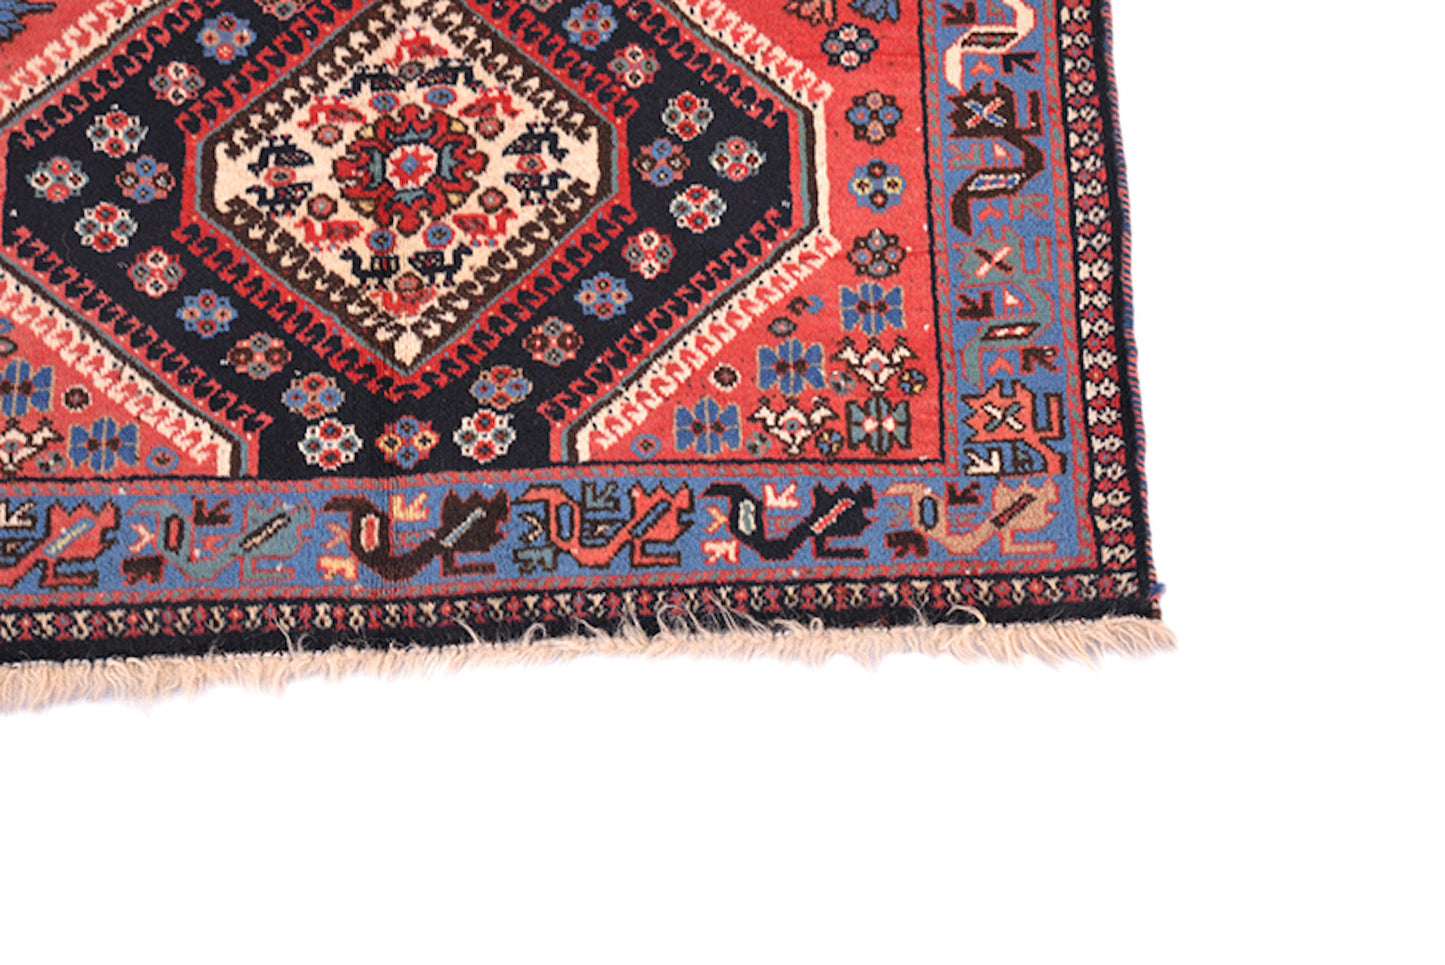 3 x 4 Bright Coral and Blue Tribal Rug with Diamond Medallion Pattern | Caucasian Accent Rug for Rustic Home Style